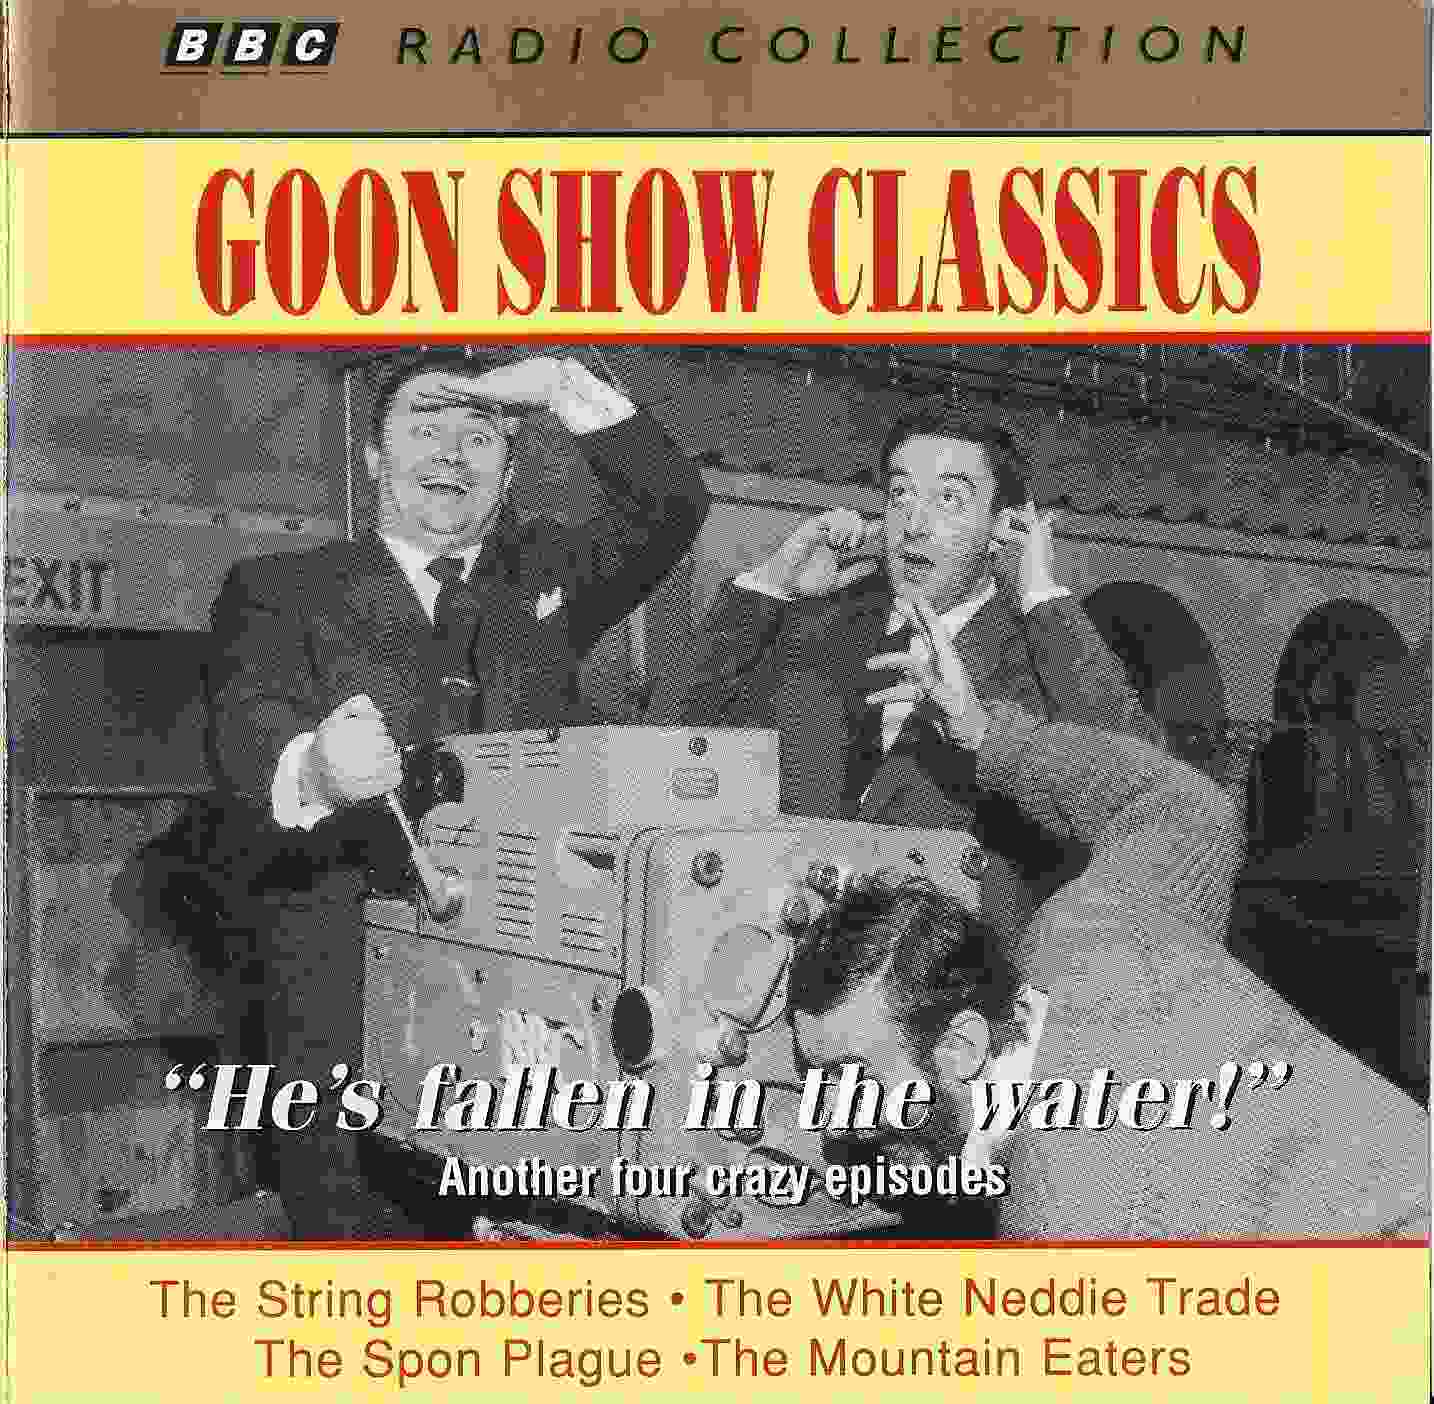 Picture of ZBBC 1602 CD Goon show classics 11 - He's fallen in the water by artist Spike Milligan / Larry Stephens from the BBC cds - Records and Tapes library